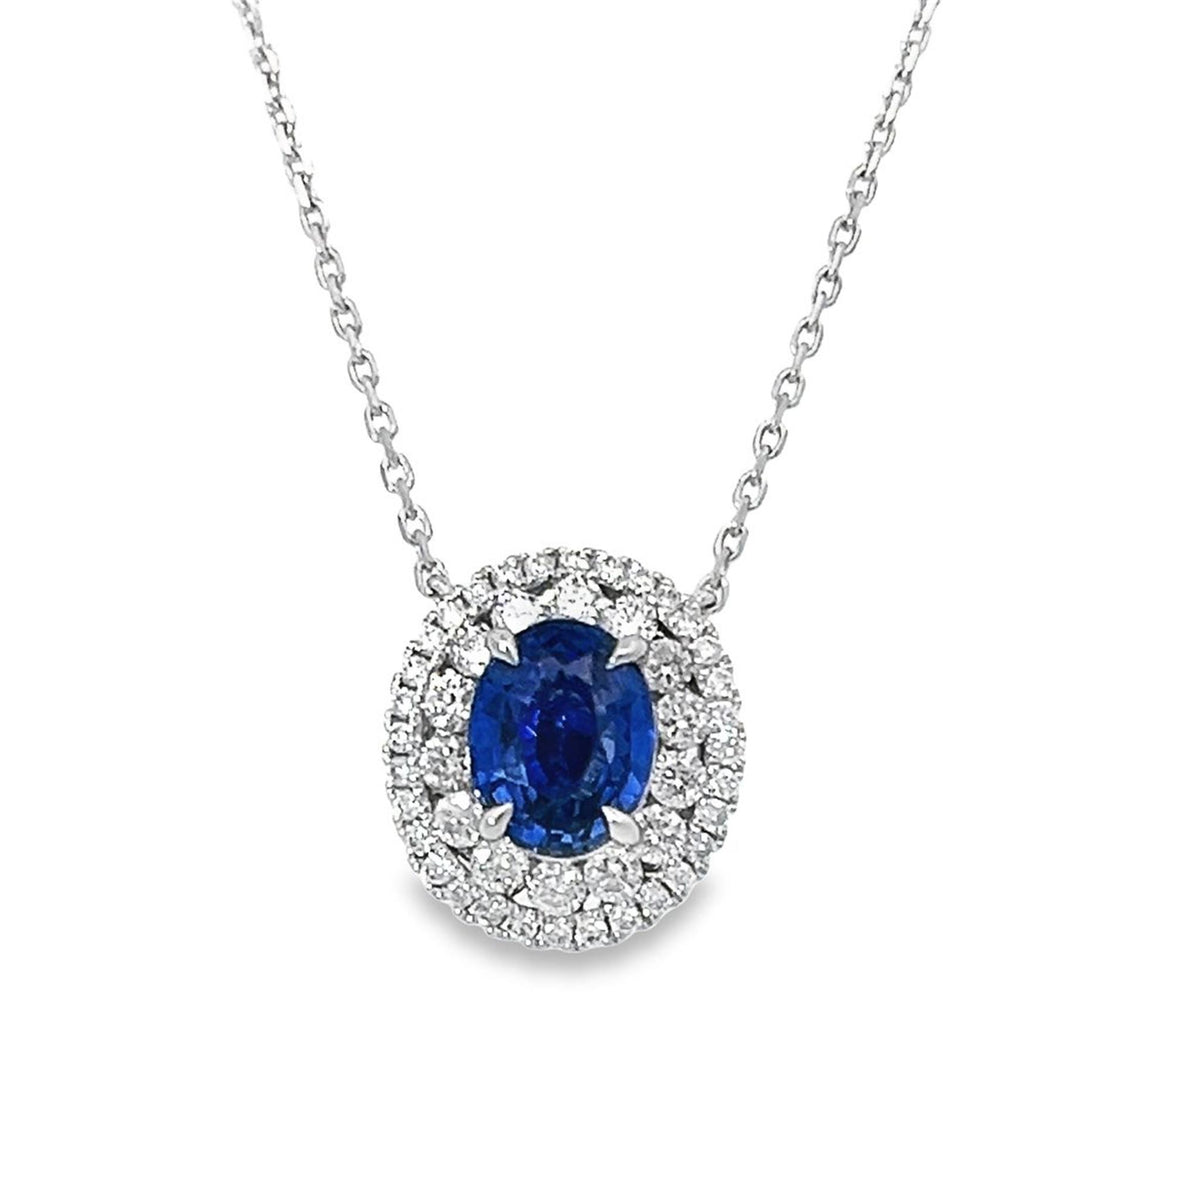 18Kt White Gold Halo Pendant With 2.14ct Oval Fine Blue Sapphire